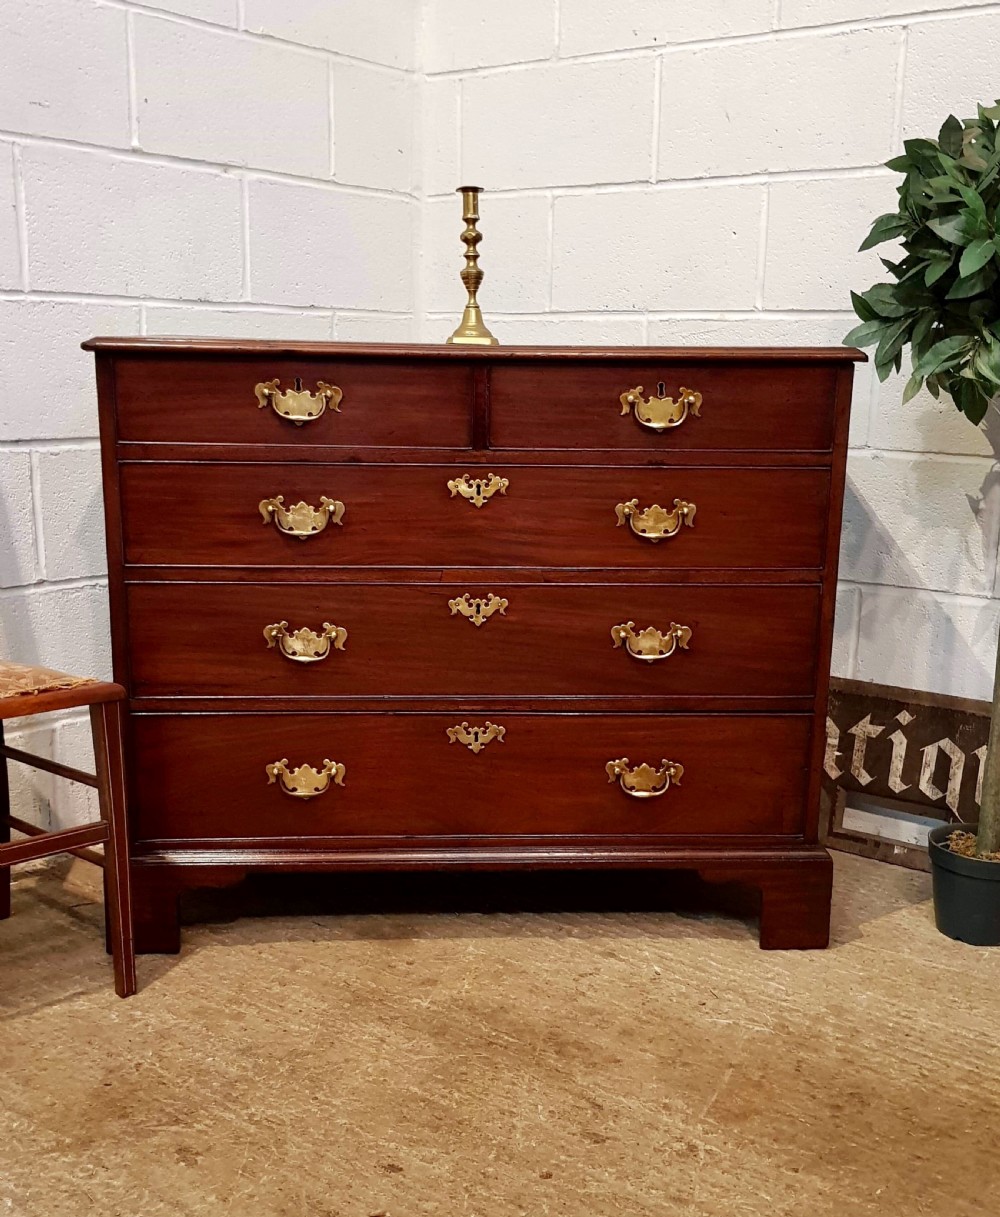 antique 18th century period mahogany small chest of drawers c1780